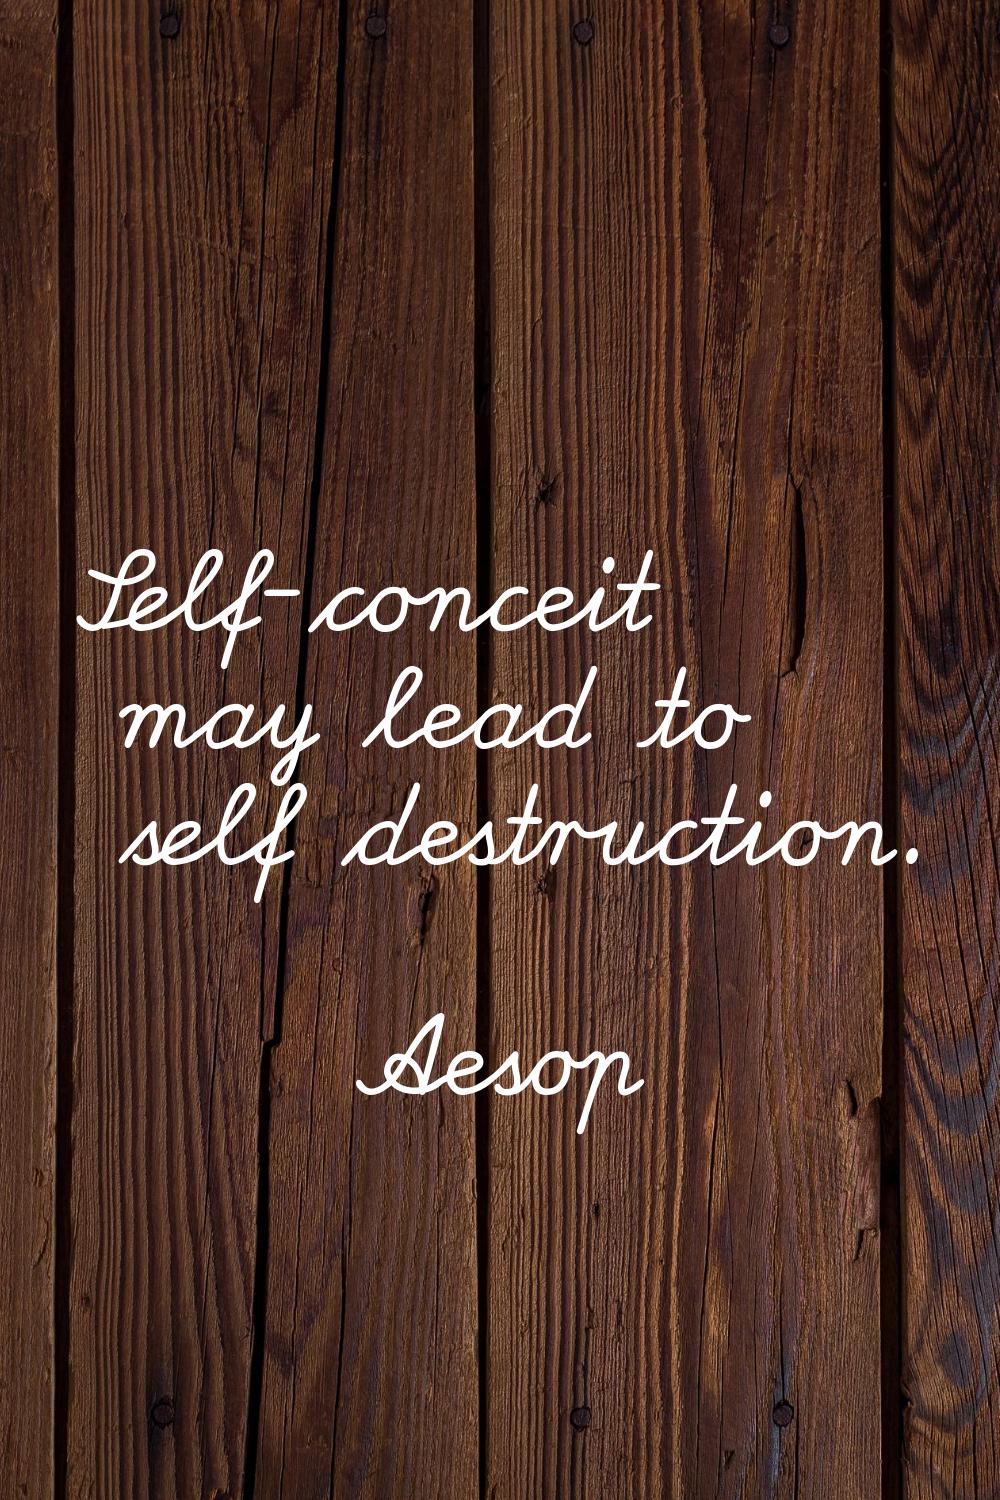 Self-conceit may lead to self destruction.